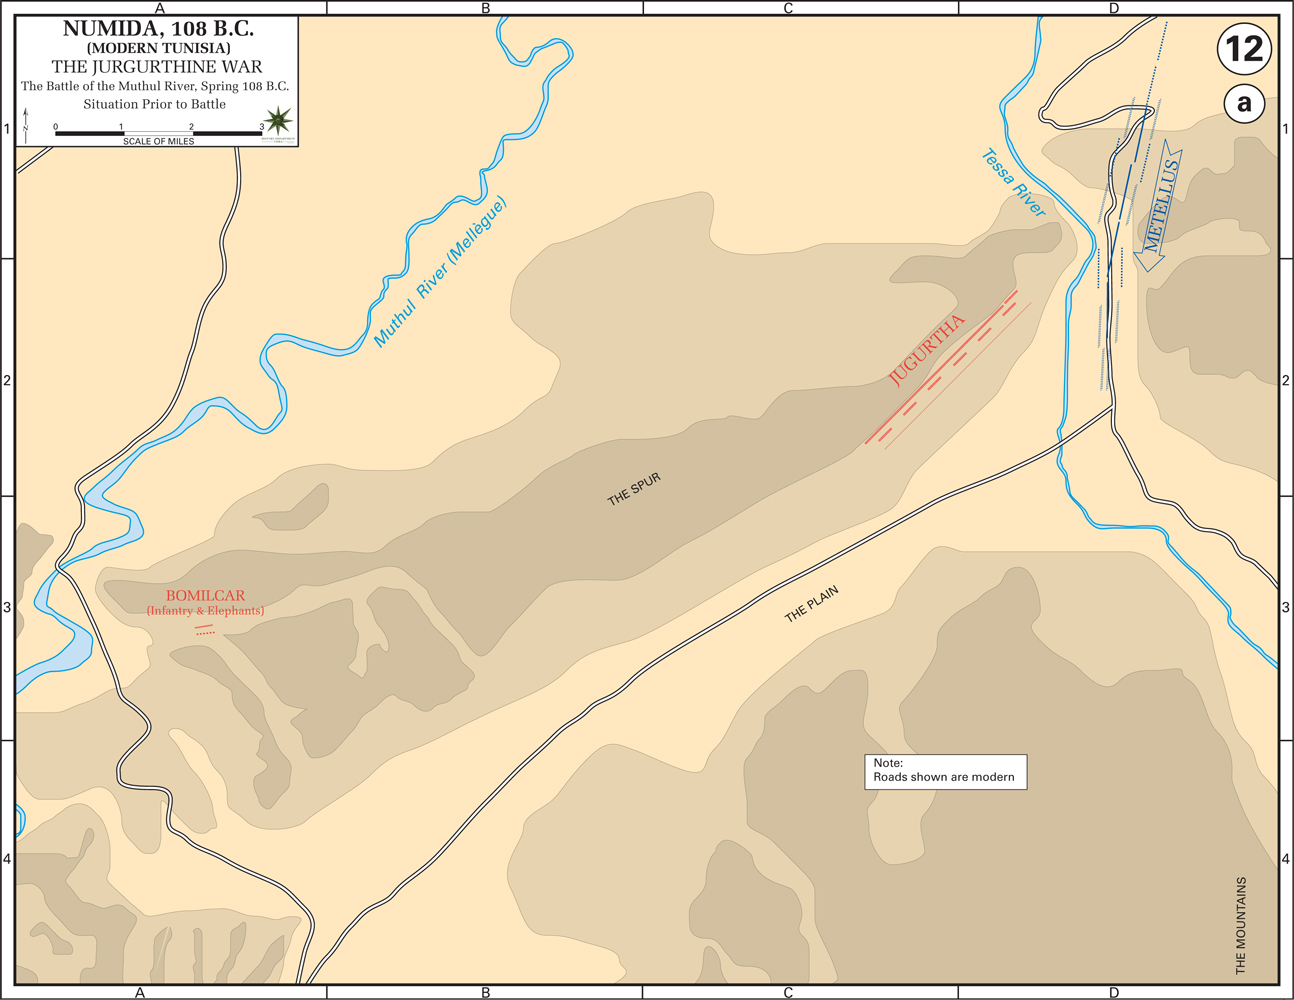 Map of Ancient Numidia: the Battle of the Muthul River, 108 BC - Situation Prior to Battle